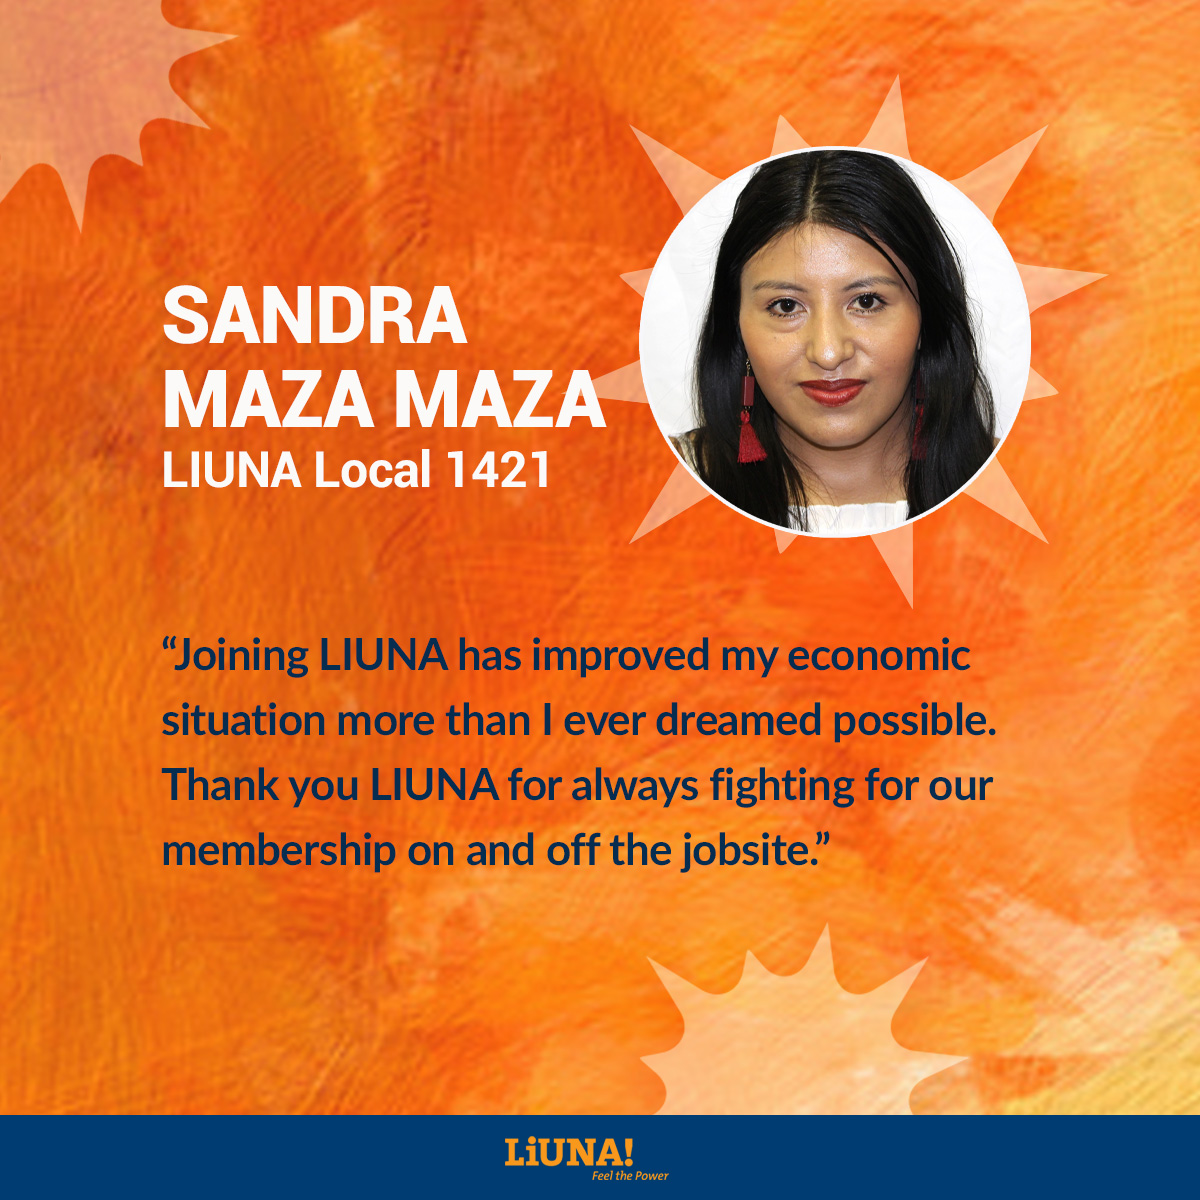 #WomensHistoryMonth continues & so does our celebration of women’s contributions to #UnionPower & #LIUNA!
 
Today meet Sandra Maza Maza from Local 1421 in Boston, MA.

#WomenInConstruction #Local1421 #BetterPay #BetterLife #Massachusetts